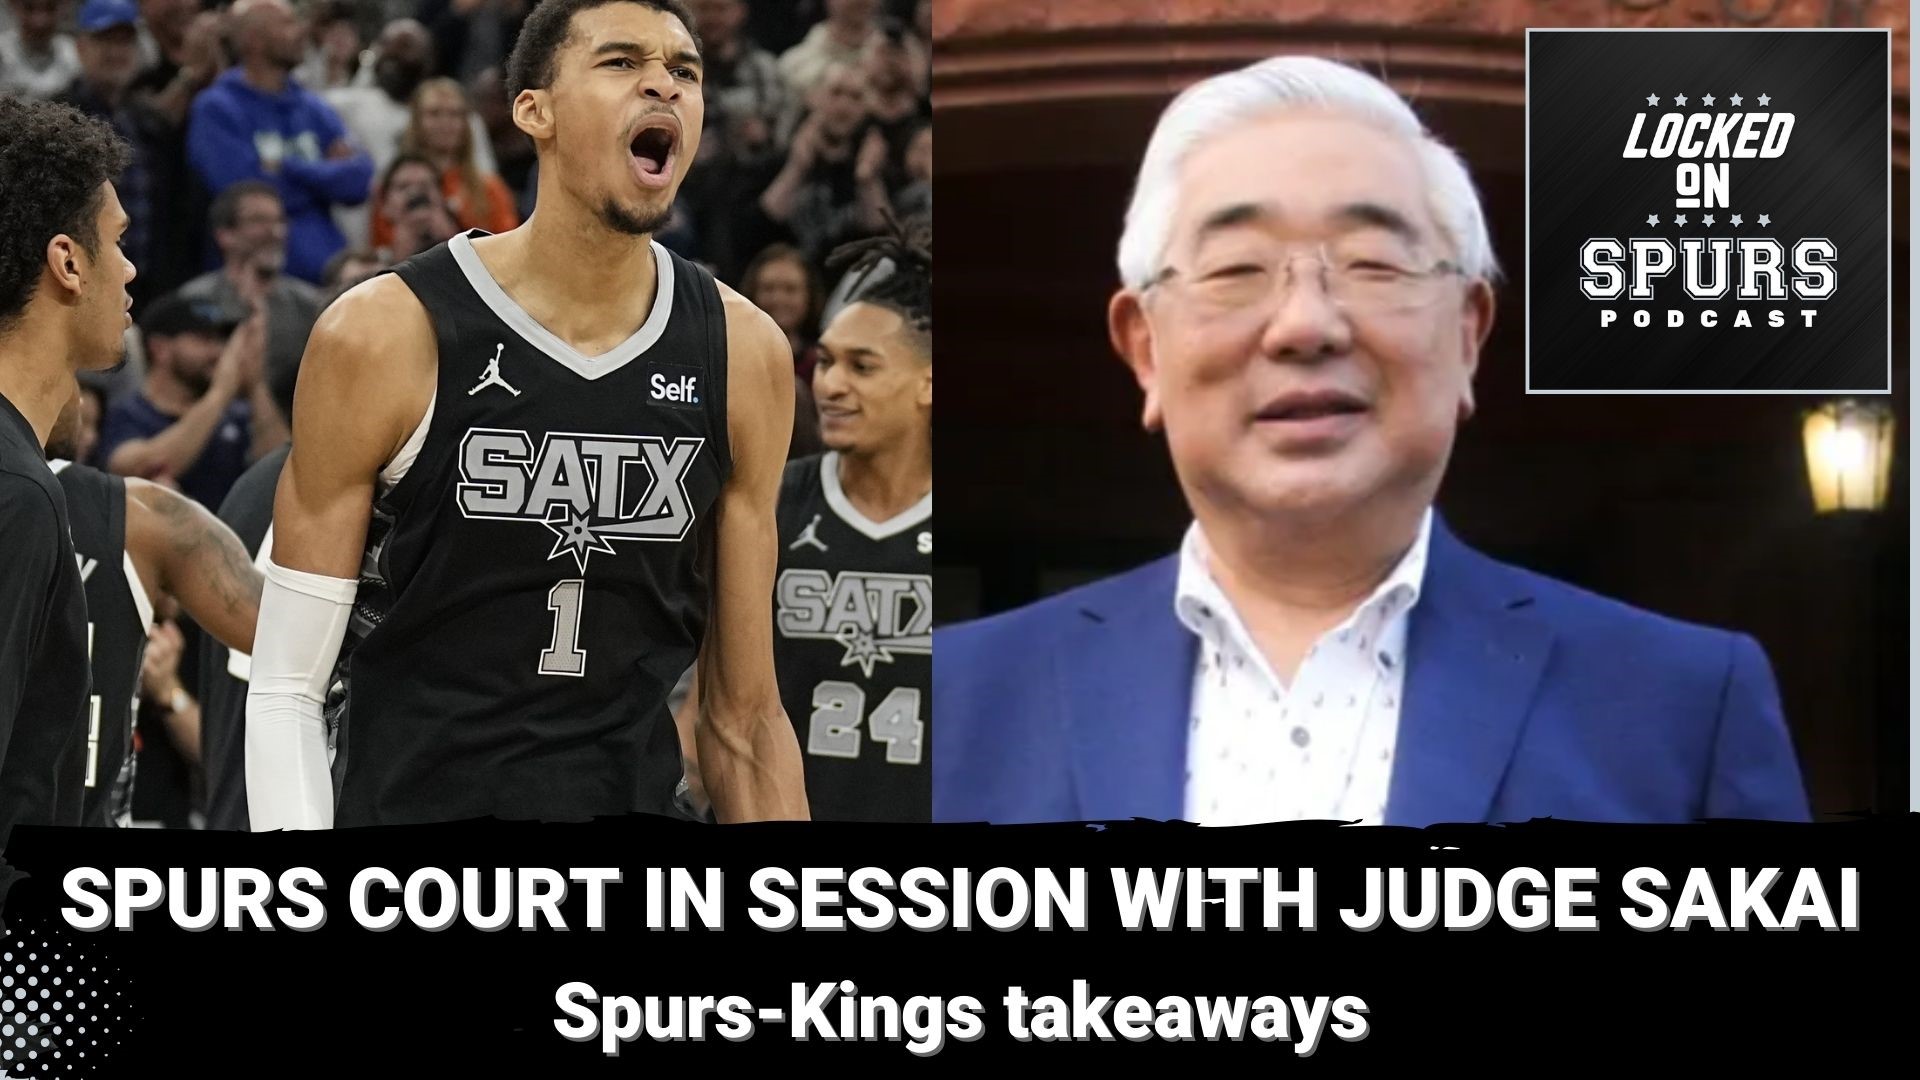 Also, takeaways from the Spurs' road loss versus the Kings.